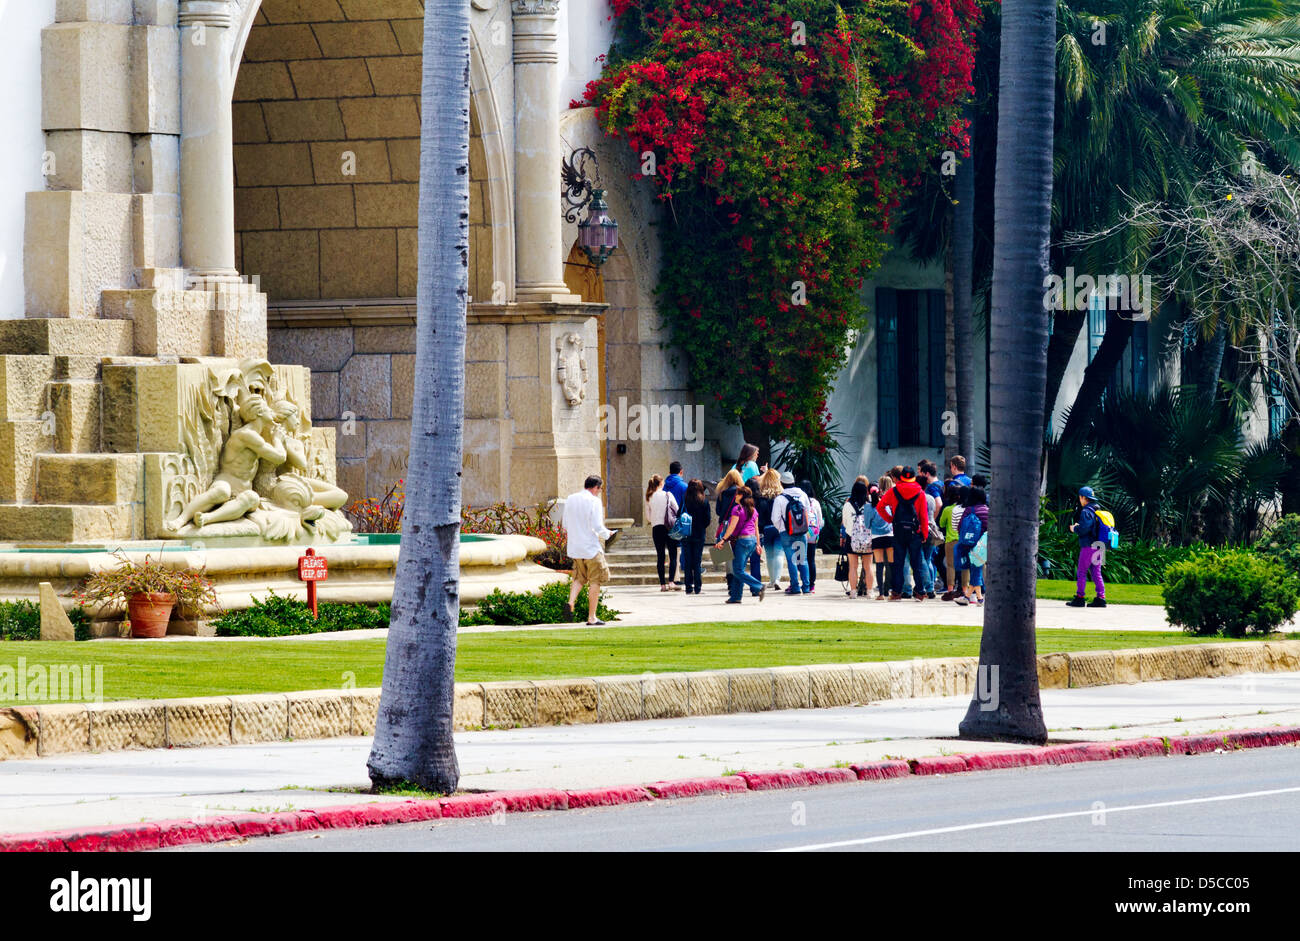 Sightseers visiting the courthouse in Santa Barbara, California Stock Photo